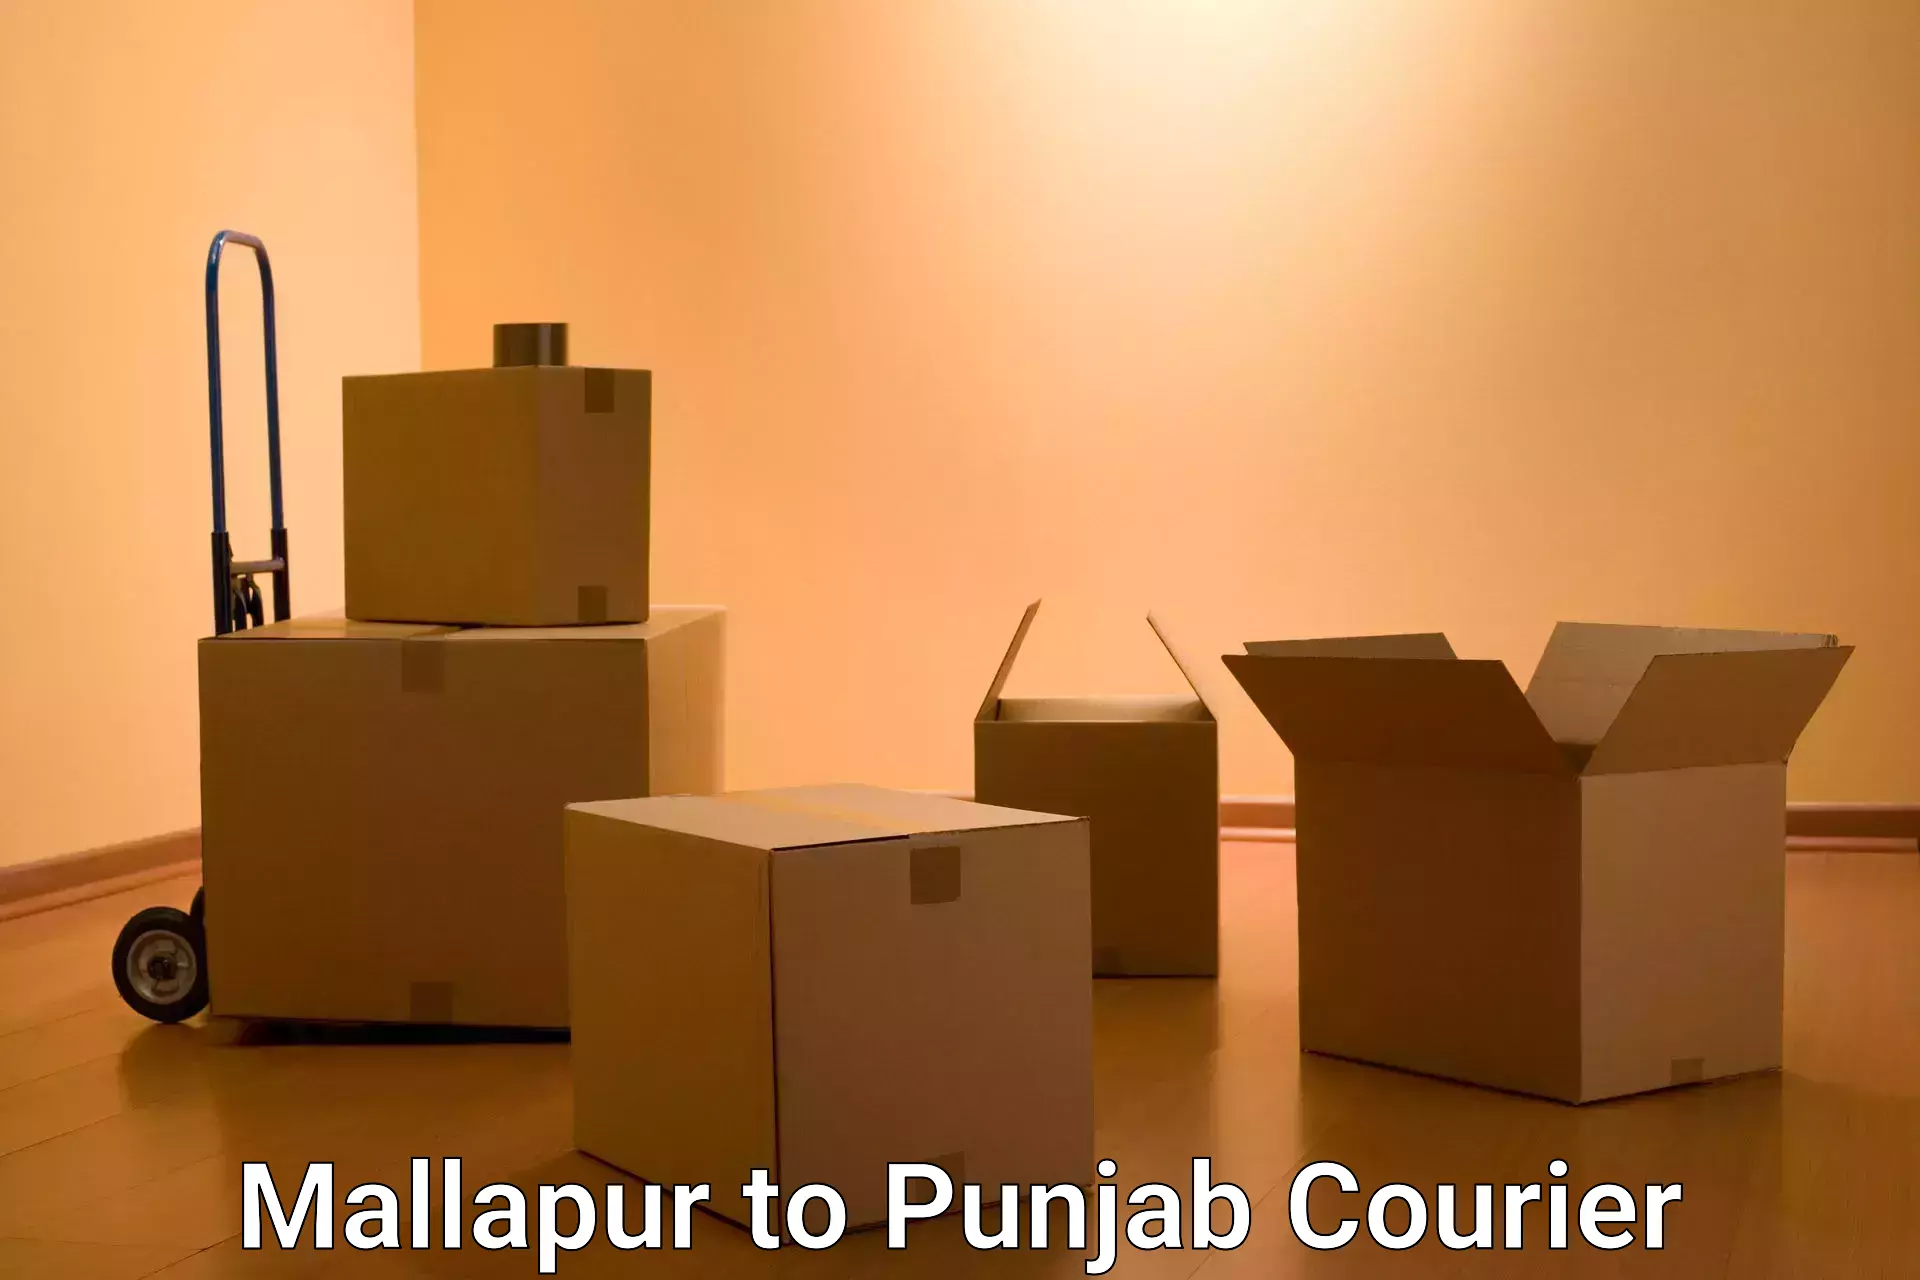 Residential courier service Mallapur to Punjab